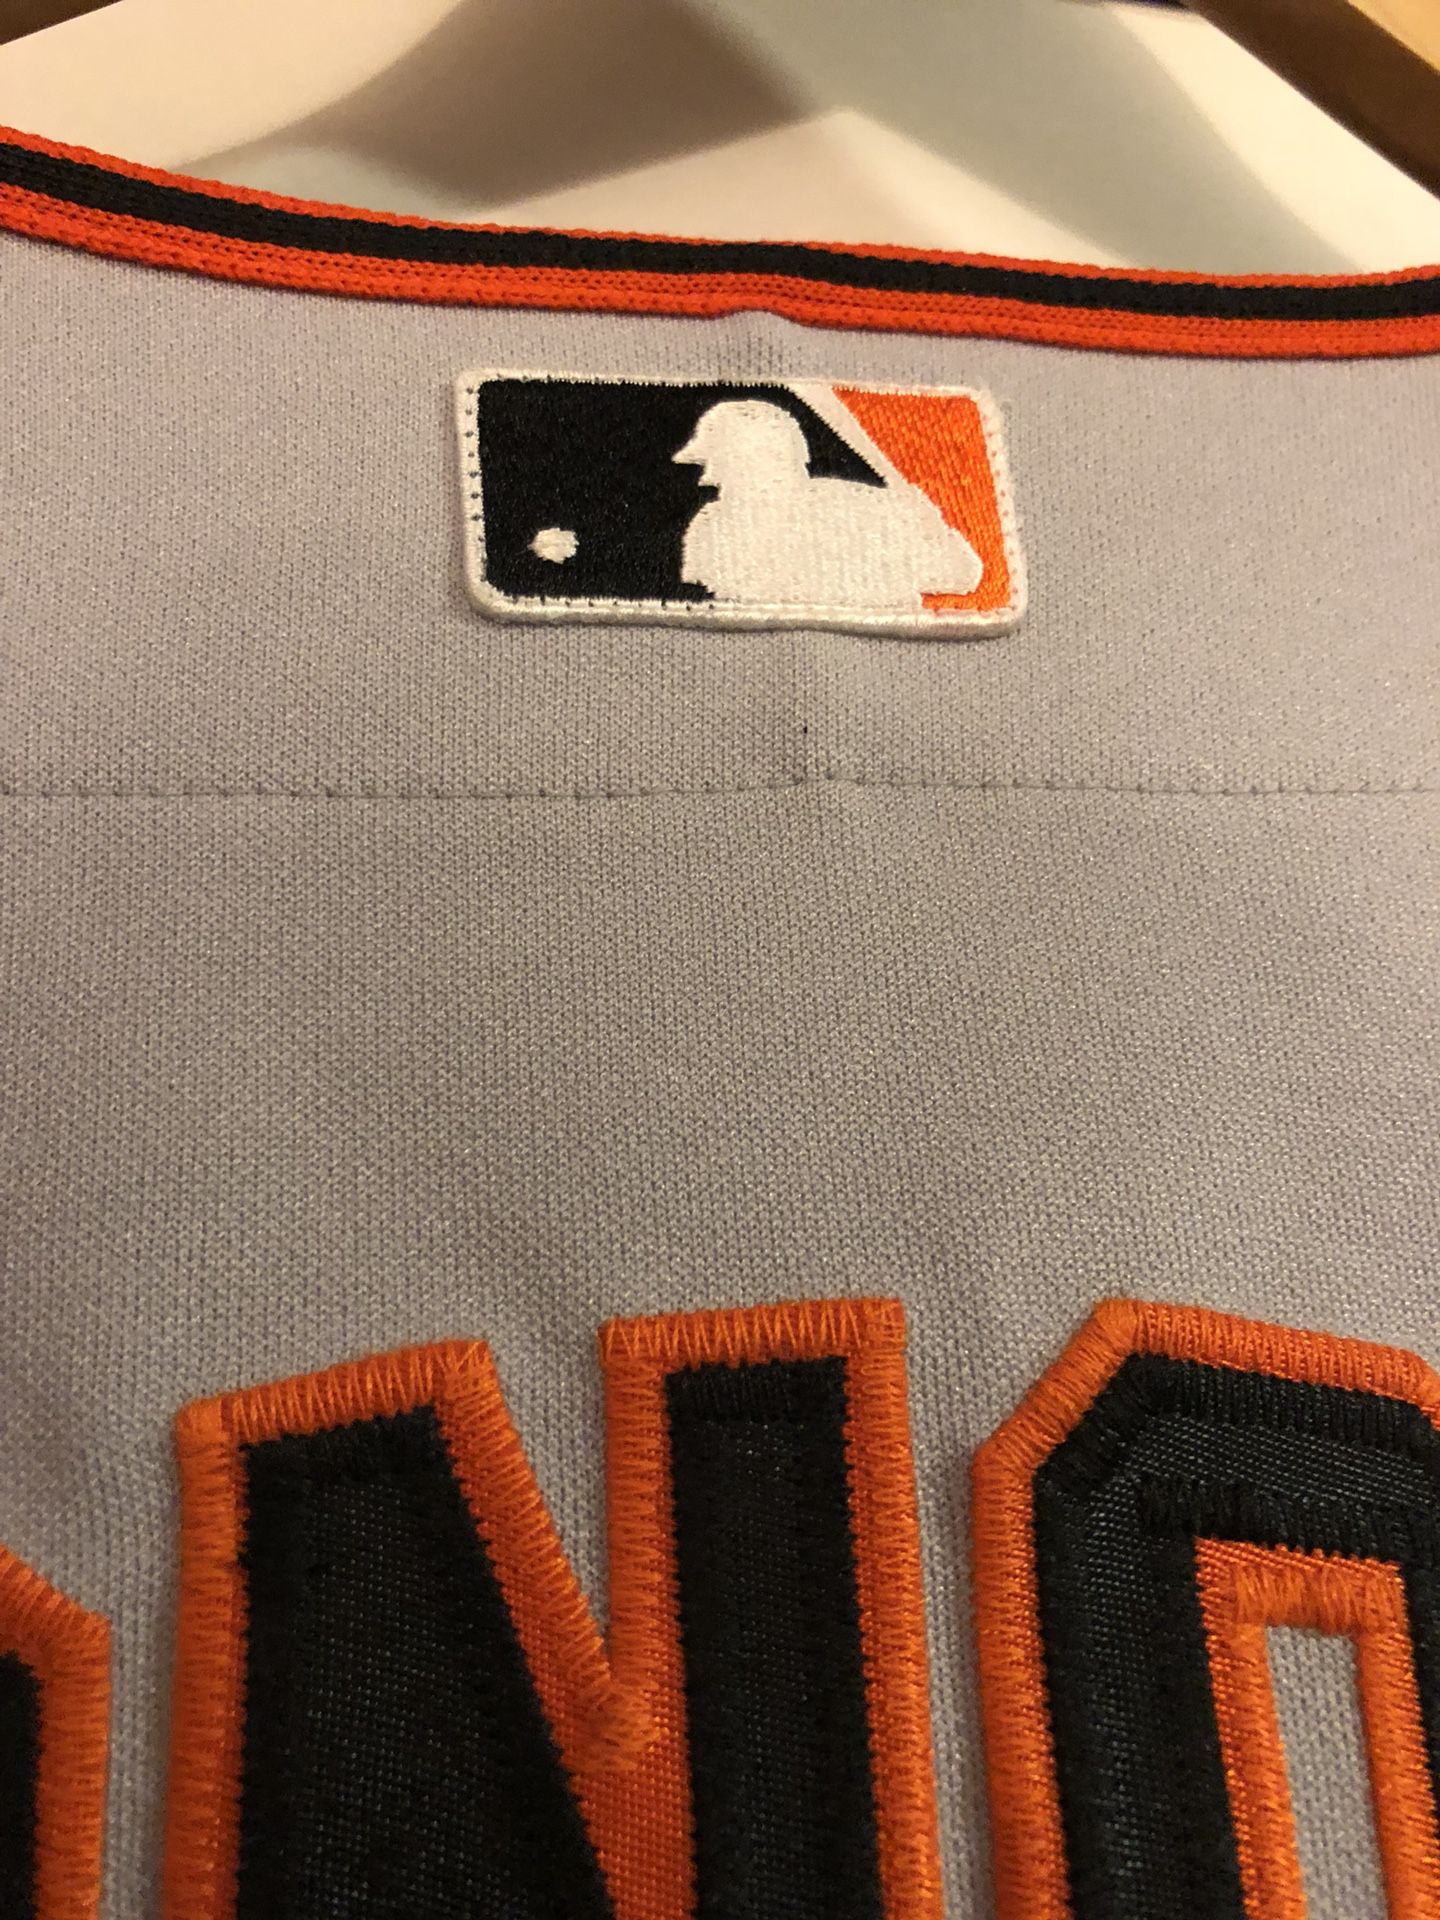 Vintage San Francisco Giants JT Snow Russell Athletic Baseball Jersey, –  Stuck In The 90s Sports